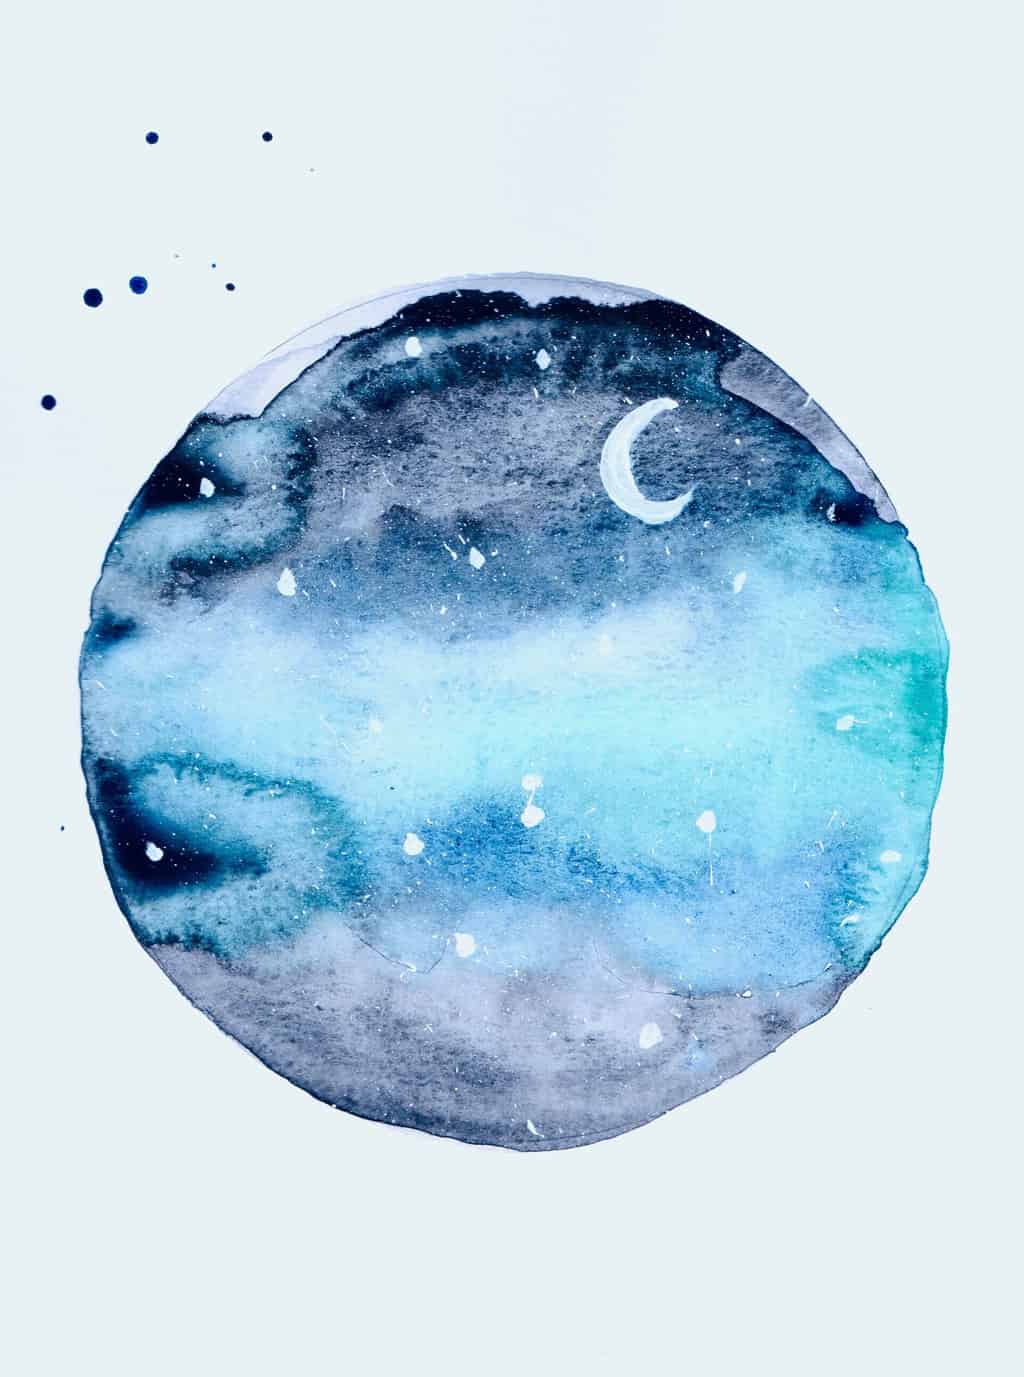 Galaxy watercolour painting for card making